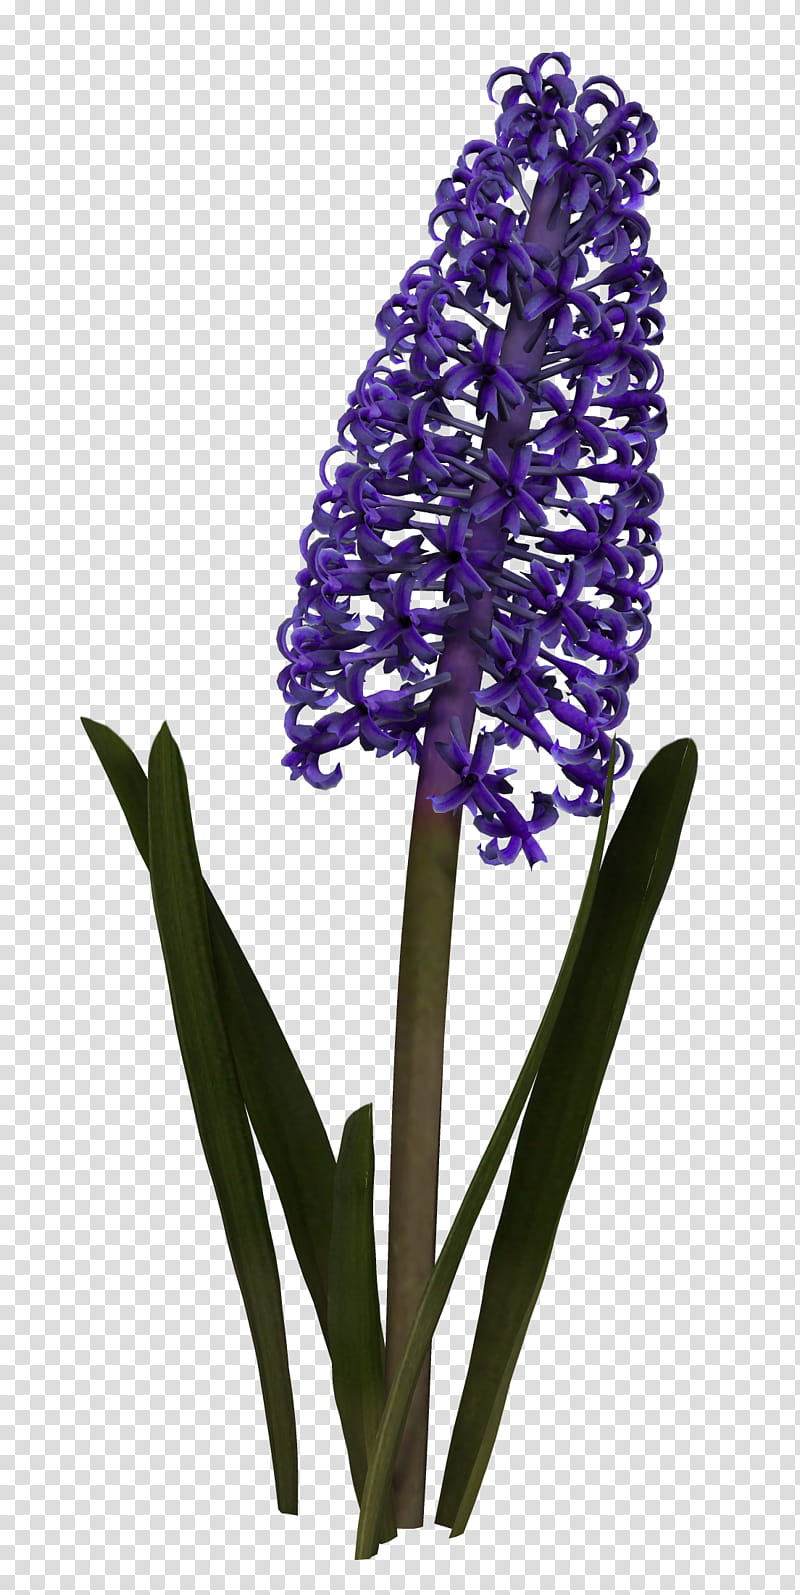 Hyacinth, purple lavender in bloom transparent background PNG clipart